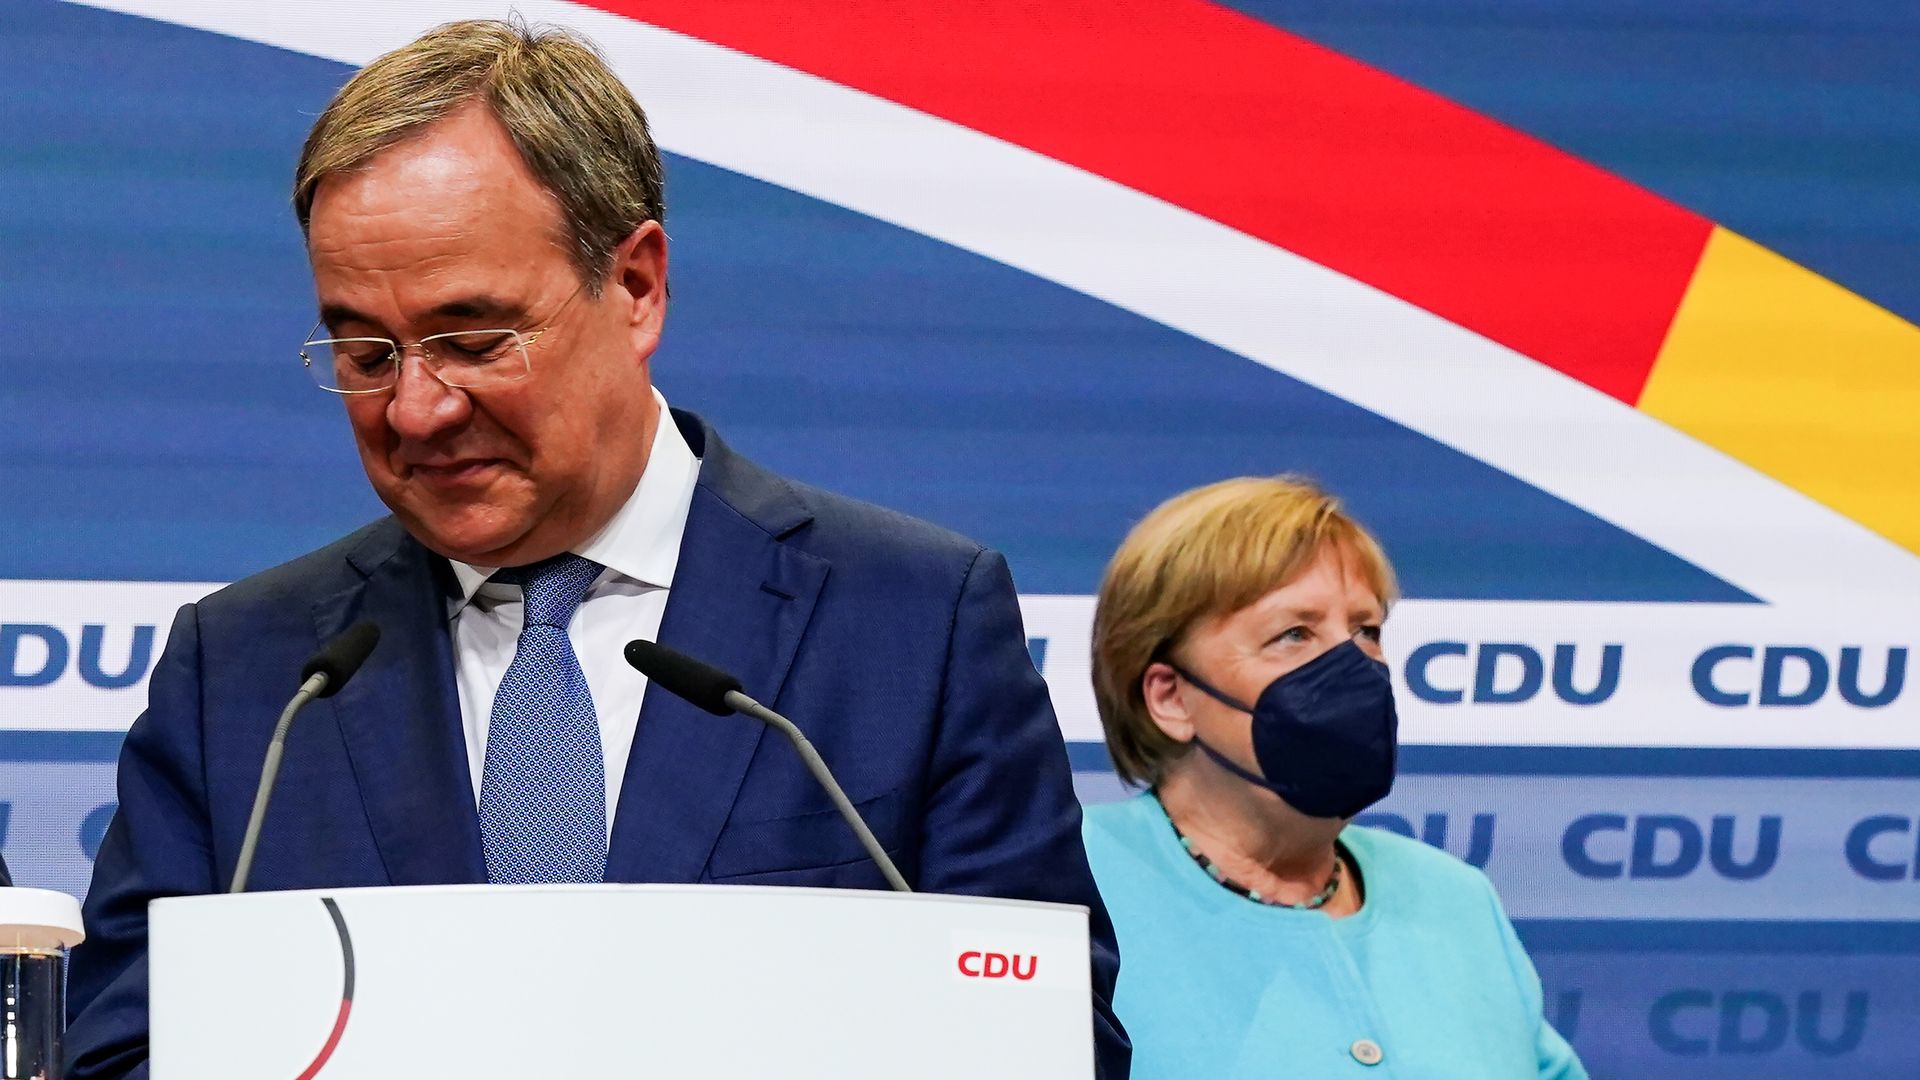 Christian Democratic Union (CDU) party chairman and candidate for the federal elections, Armin Laschet, in front of German Chancellor Angela Merkel on Sept. 26.